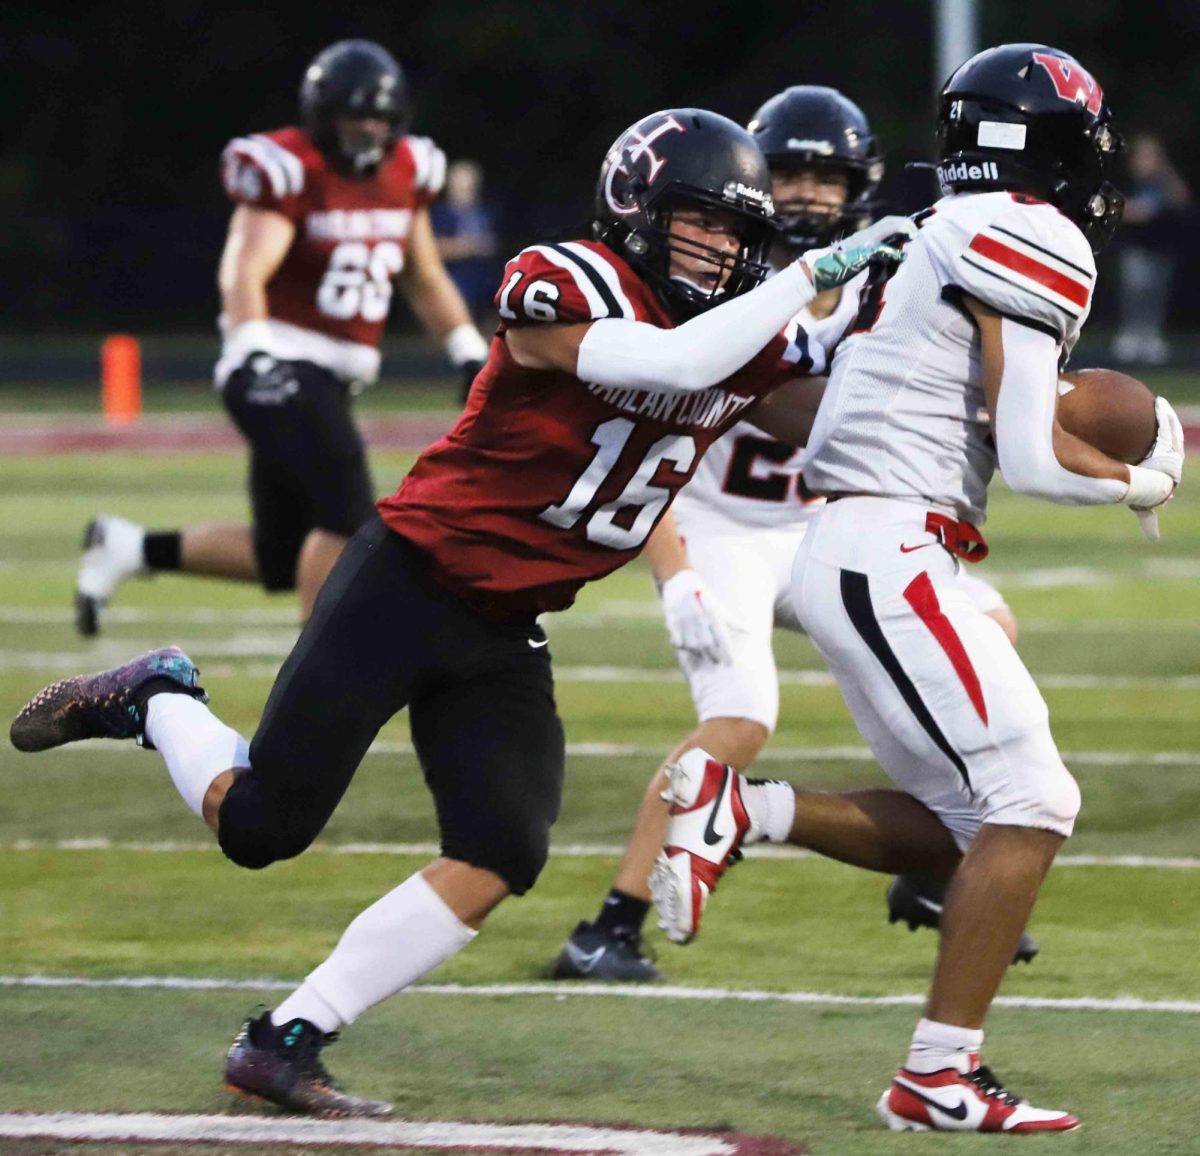 Harlan County defensive back/receiver Luke Kelly moved in for a tackle earlier this season. Kelly had a 90-yard touchdown catch and added an interception on Friday, but it wasnt enough for the Bears in a 44-20 loss.